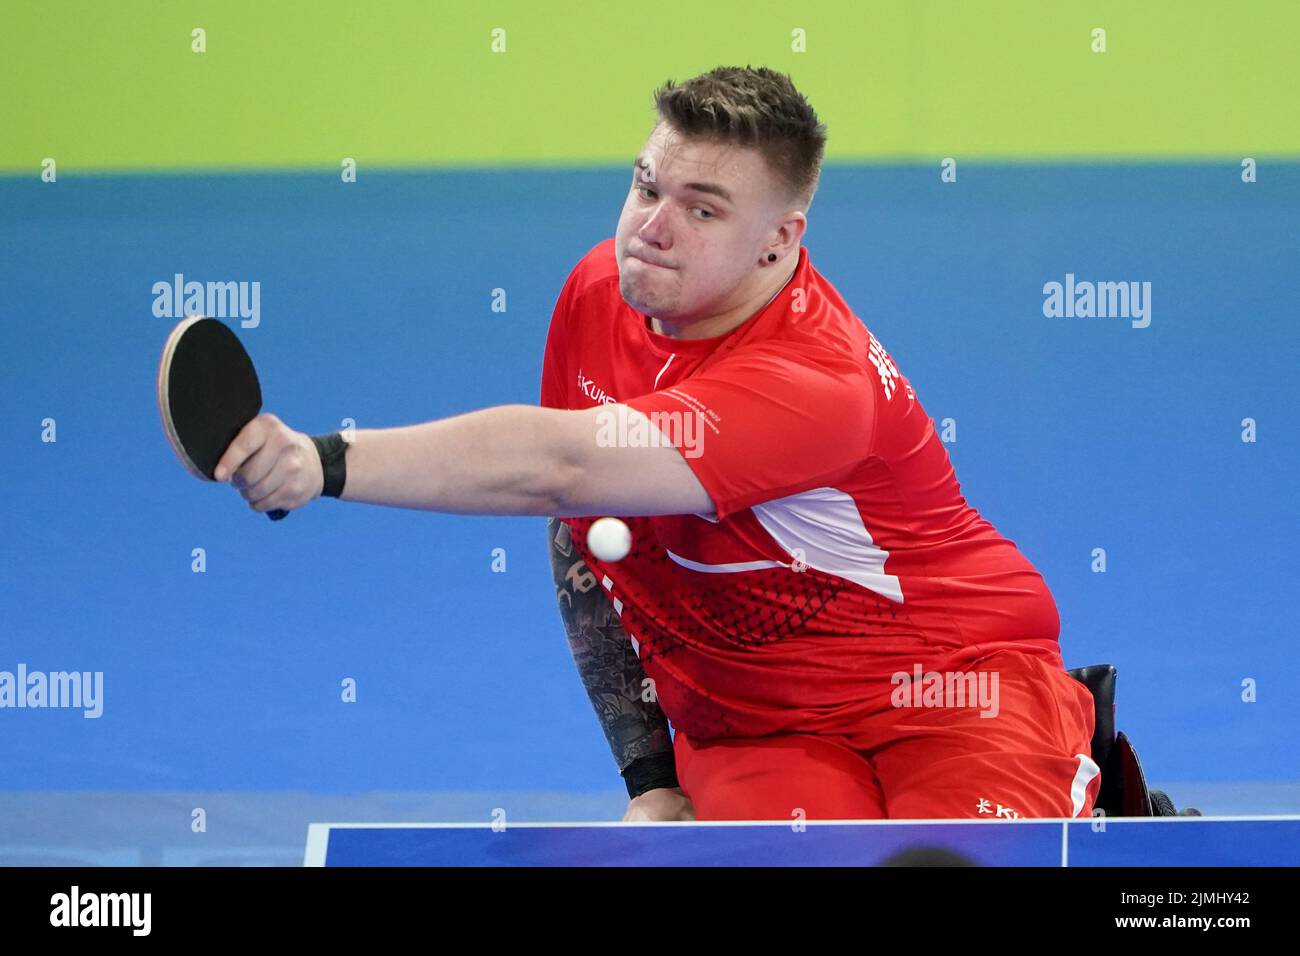 England 's Jack Hunter-Spivey in action against Nigeria's Nasiru Sule in the Men's Singles Classes 3-5 - Gold Medal Match at The NEC on day nine of the 2022 Commonwealth Games in Birmingham. Picture date: Saturday August 6, 2022. Stock Photo